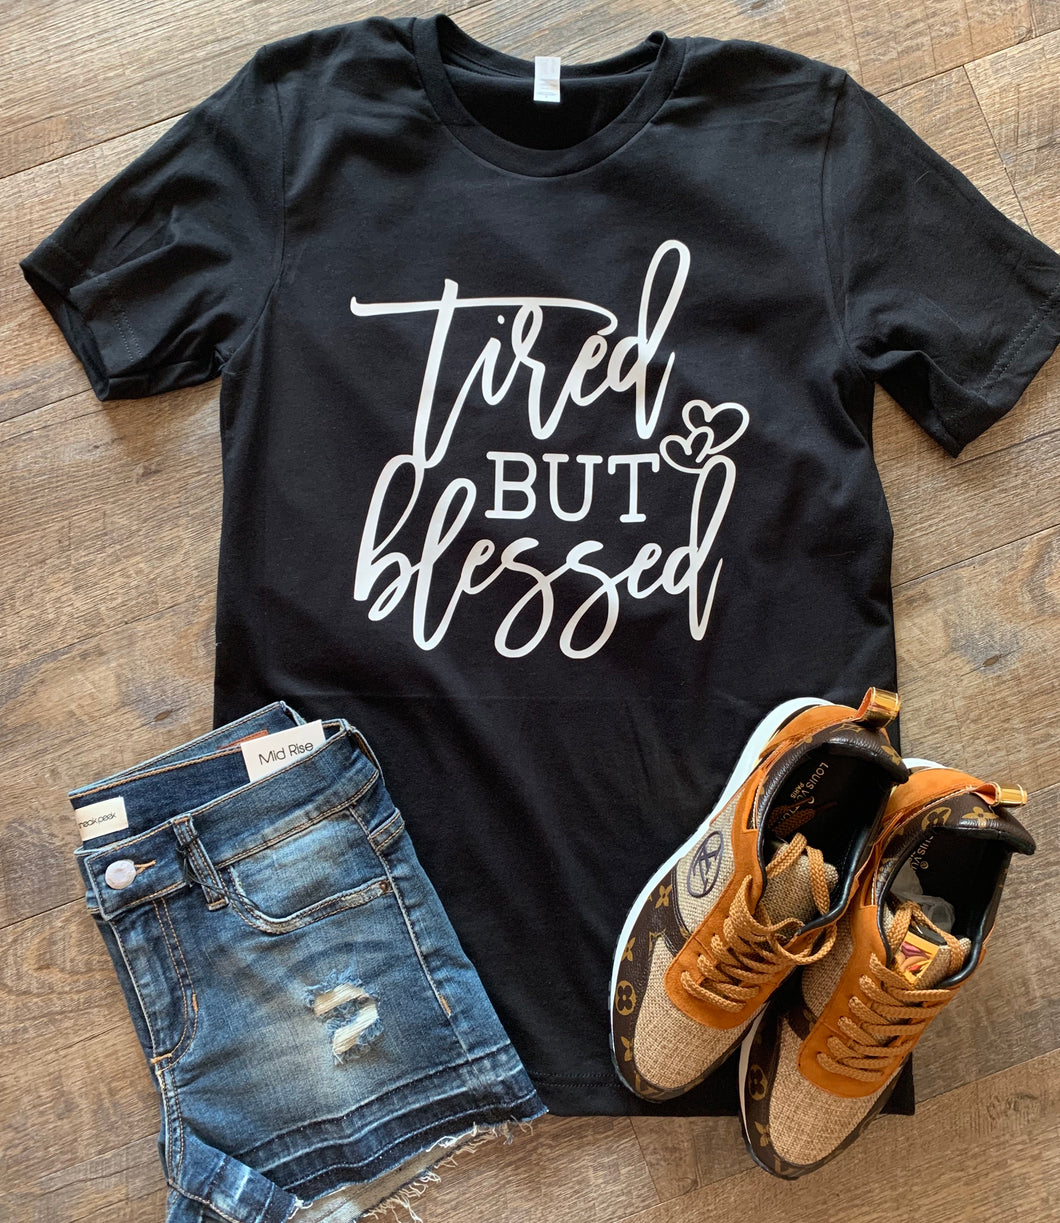 Tired but blessed. Graphic tee. - Mavictoria Designs Hot Press Express